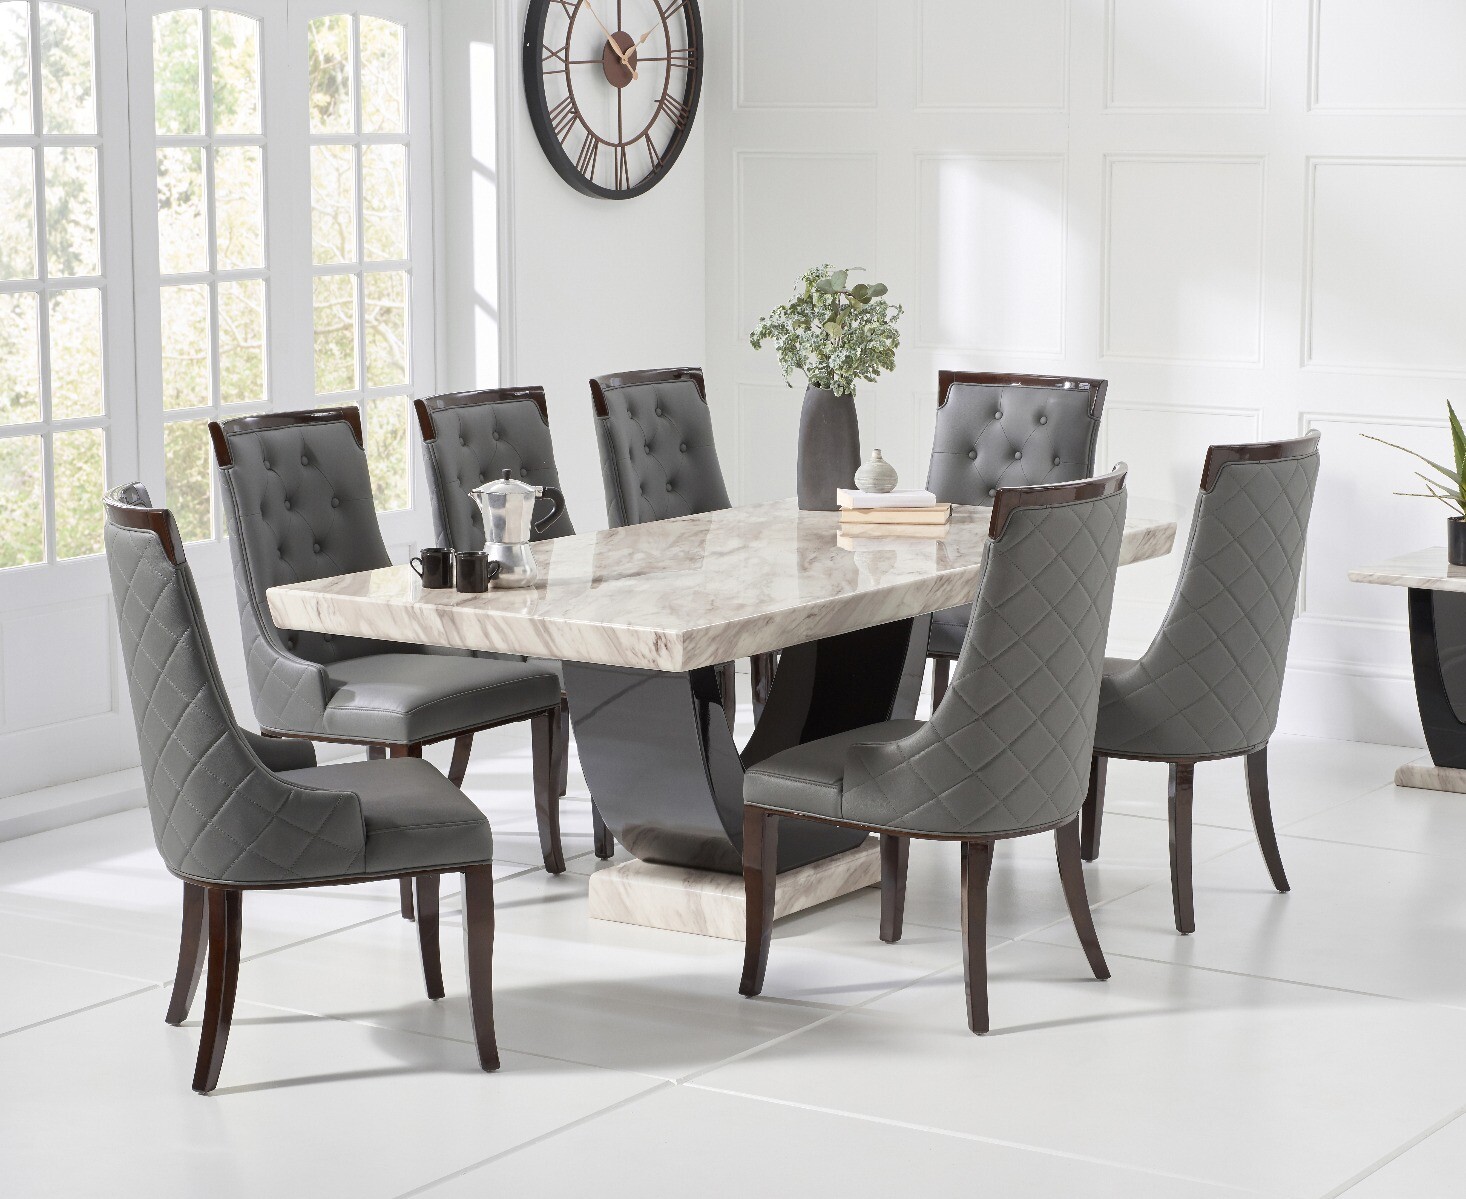 Novara 200cm Cream And Black Pedestal Marble Dining Table With 12 Grey Francesca Chairs